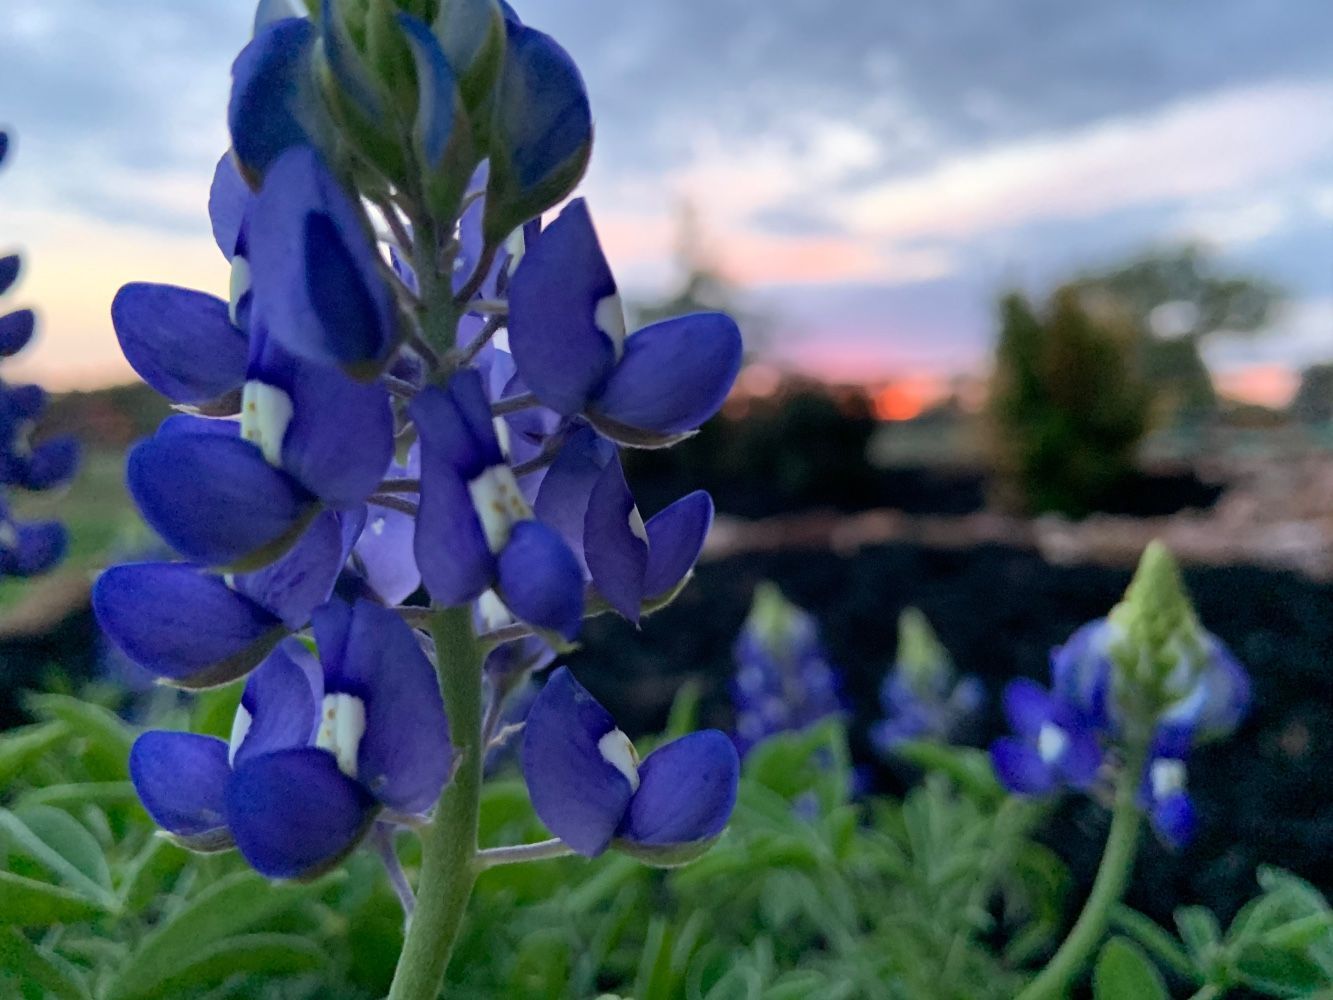 A close up of a purple flower with a sunset in the background